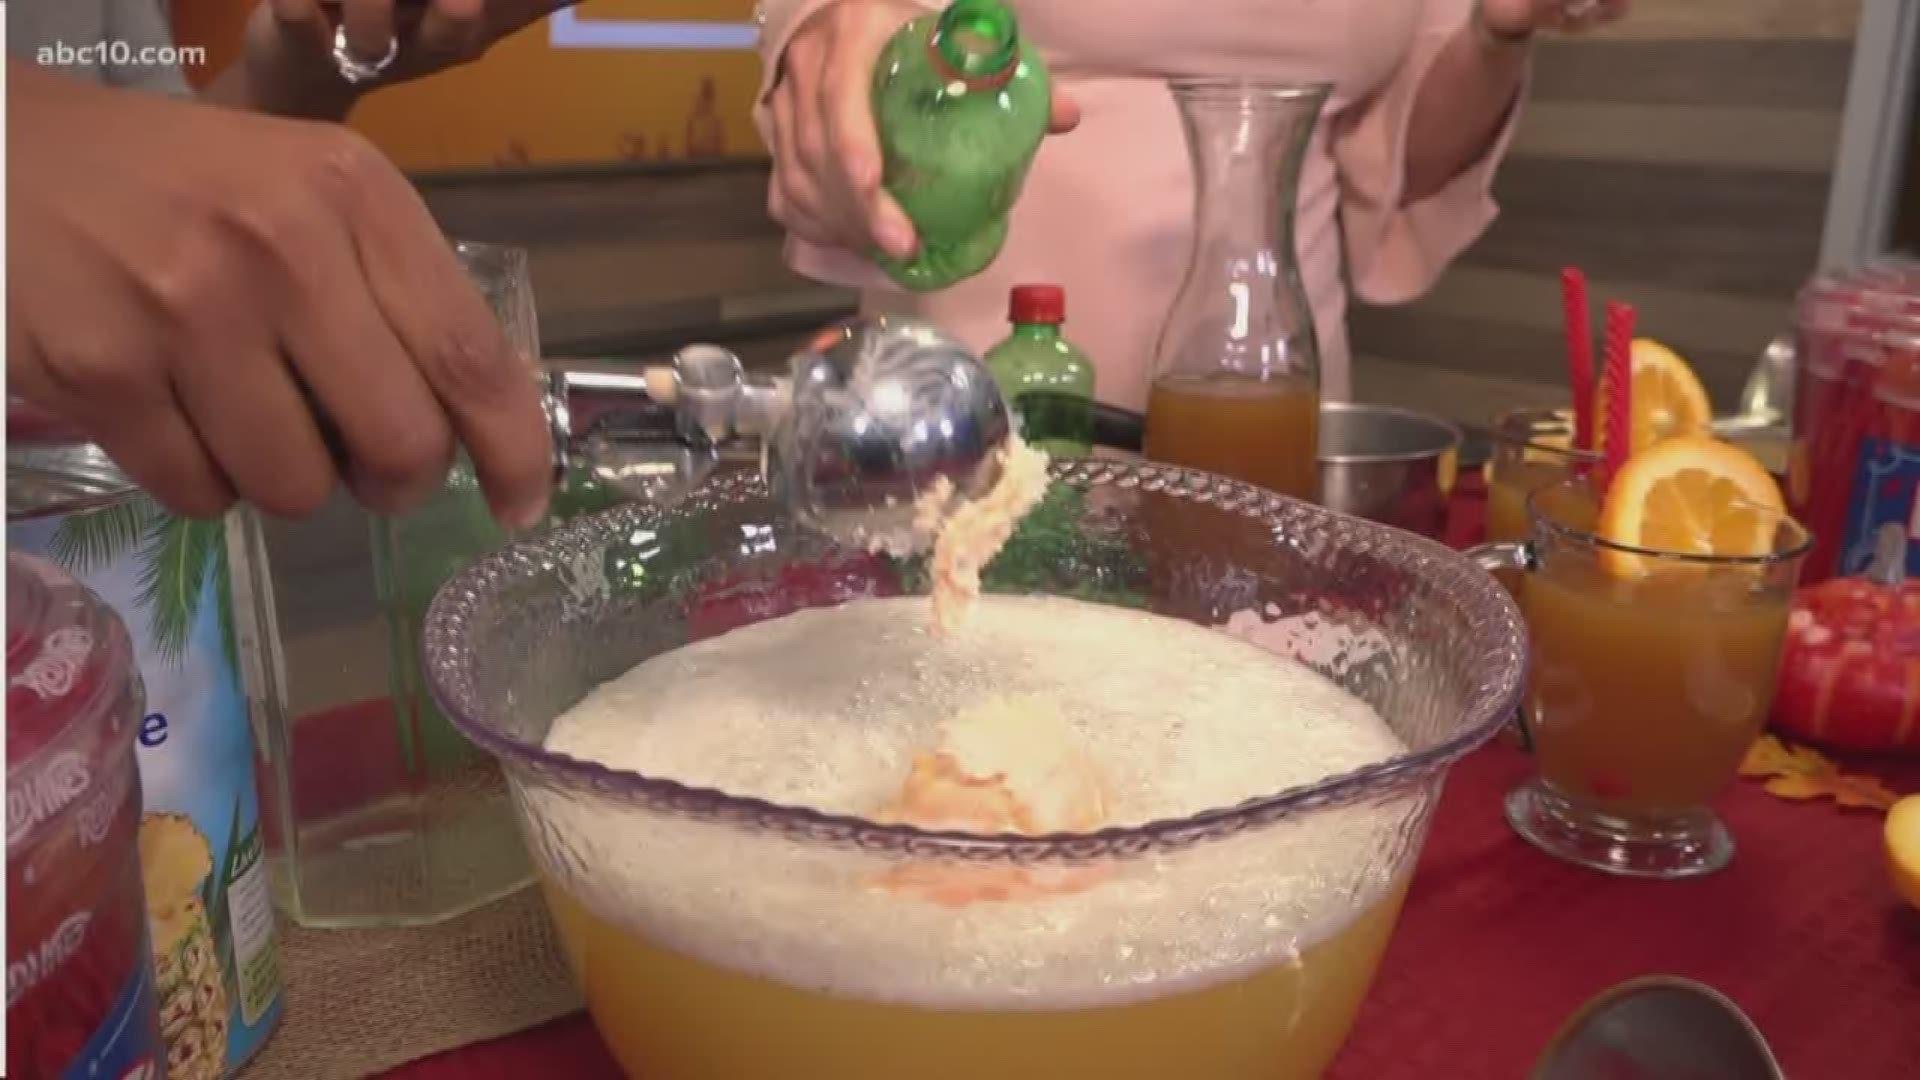 Kachet Jackson Henderson, with Red Vines, shows how to make hot mulled cider and "witches' brew," some fun, kid-friendly drinks for Halloween and the fall season.